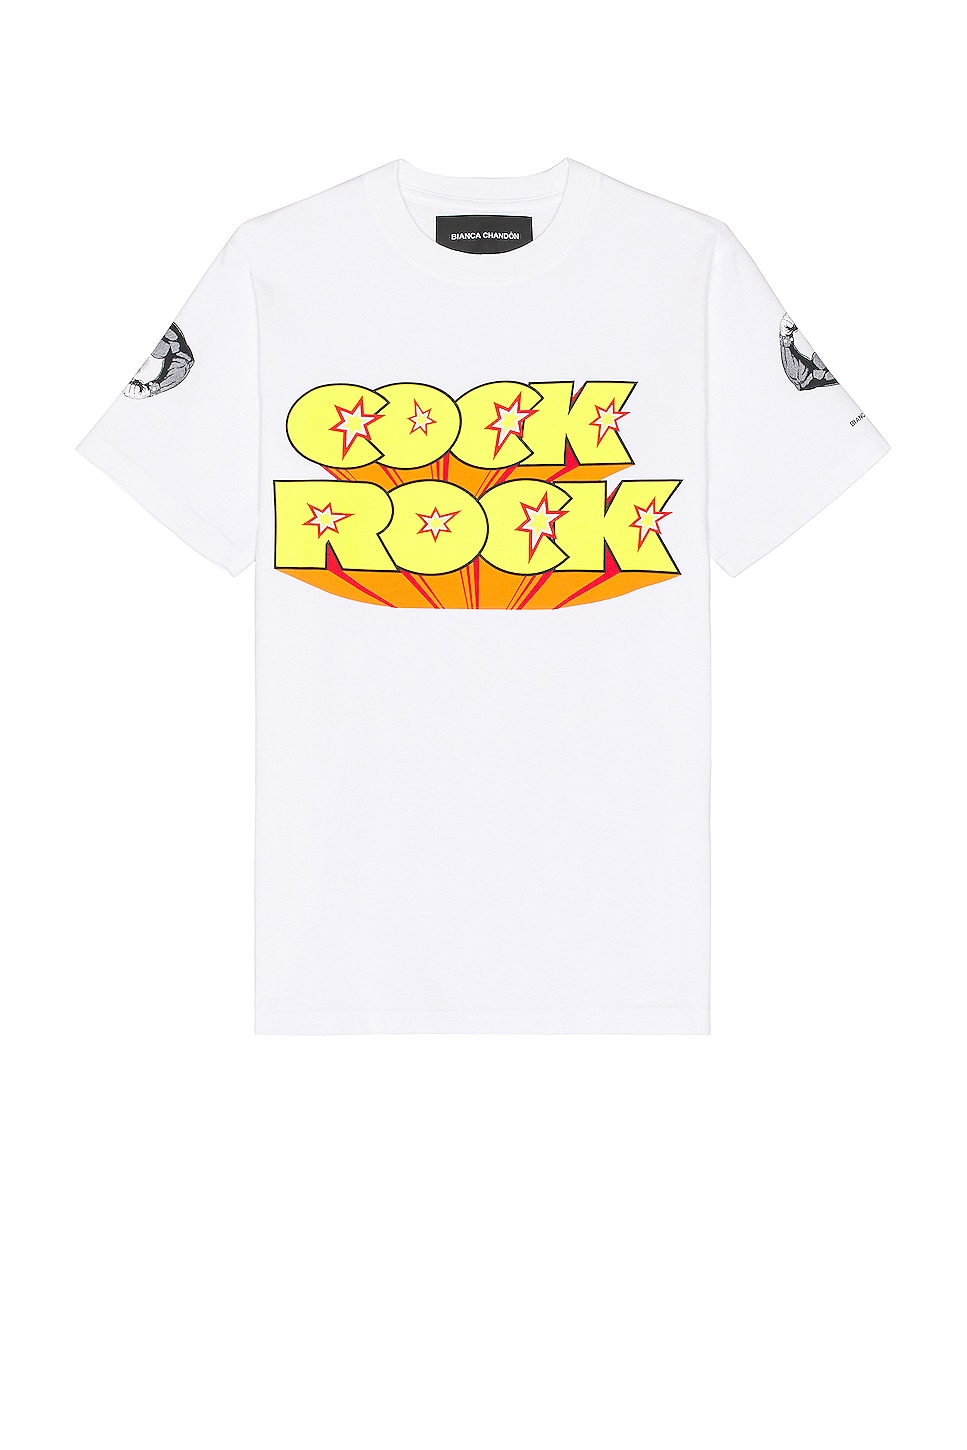 Image 1 of Bianca Chandon Glam Rock T-Shirt in White